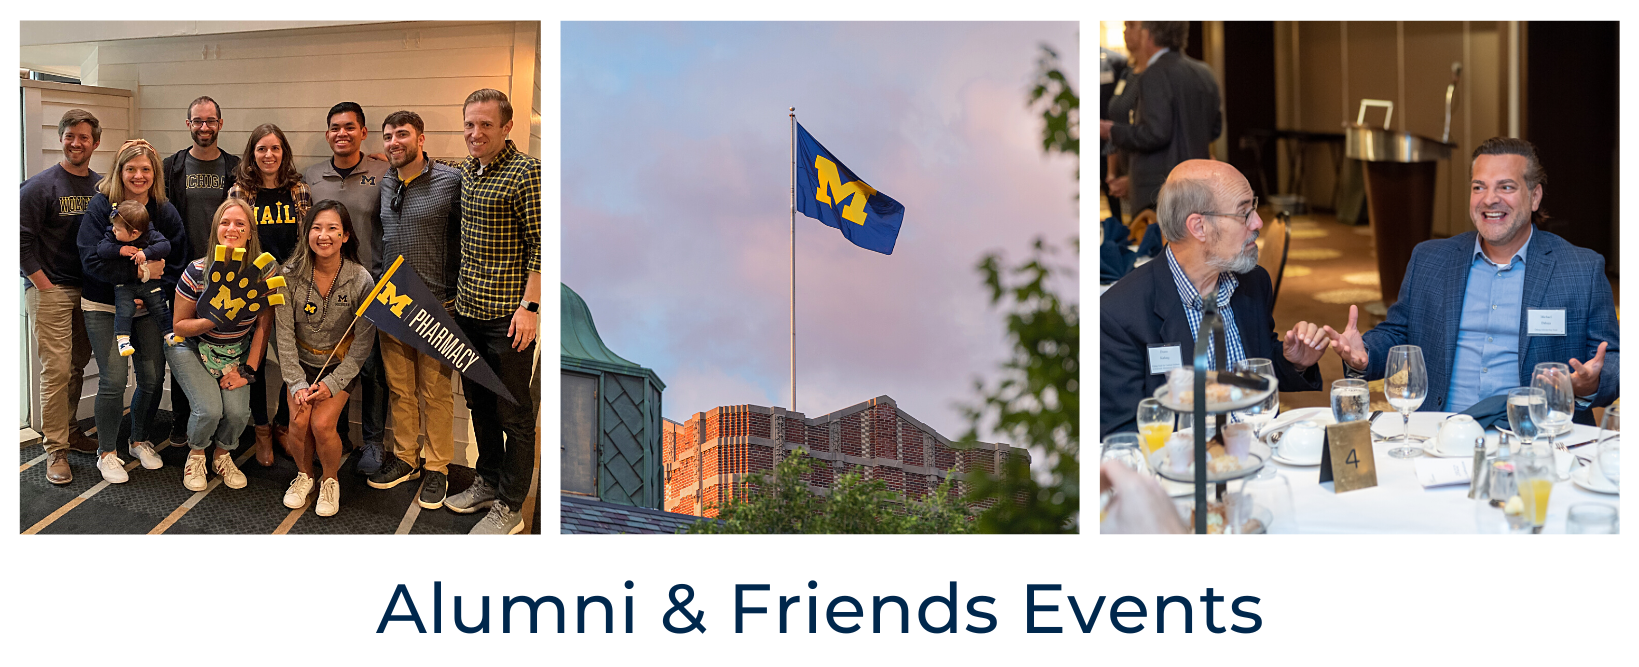 Alumni and Friends Events with 3 alumni event photos 